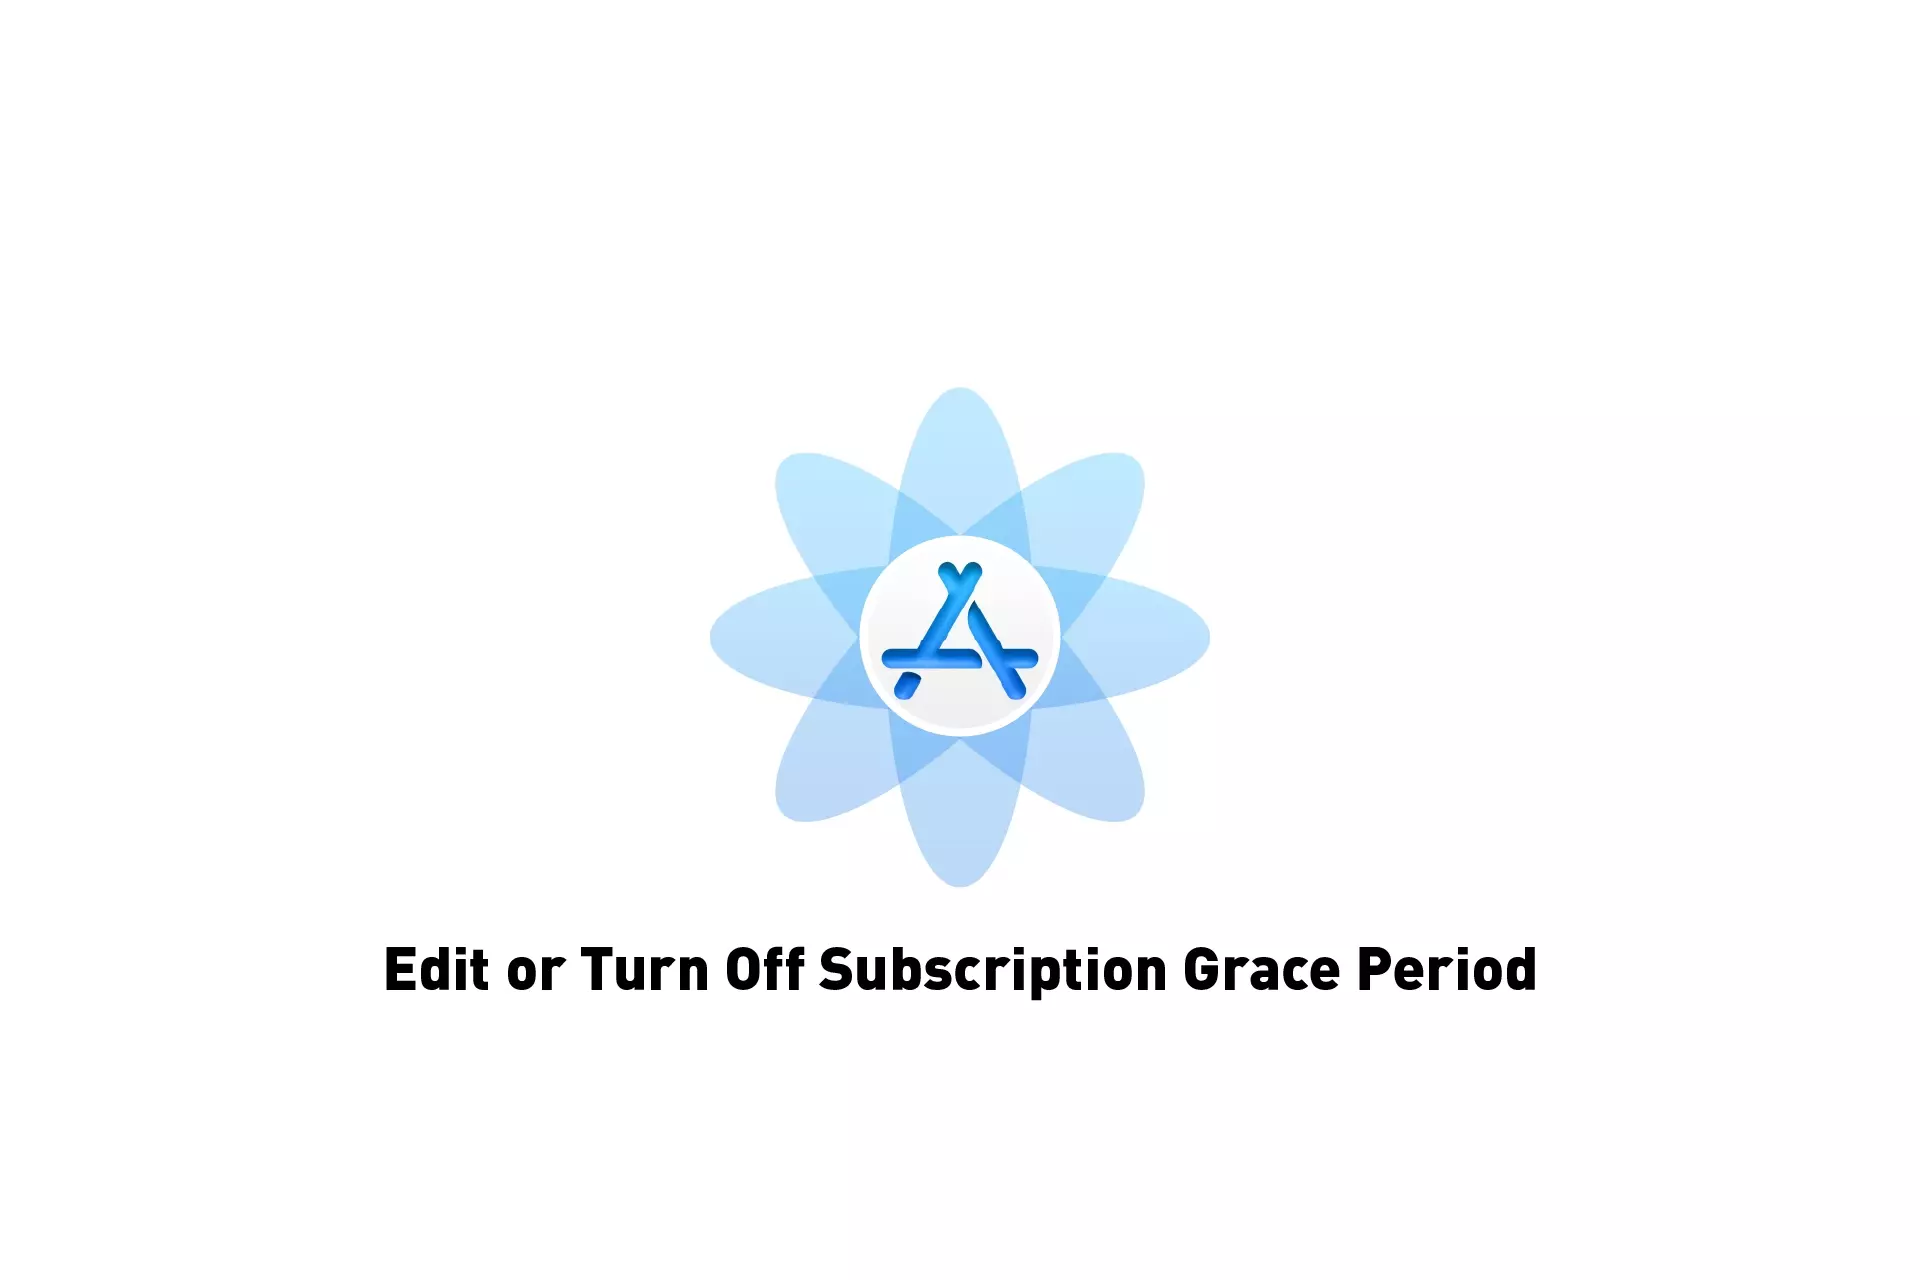 A flower that represents App Store Connect with the text "Edit or Turn off Subscription Grace Period."